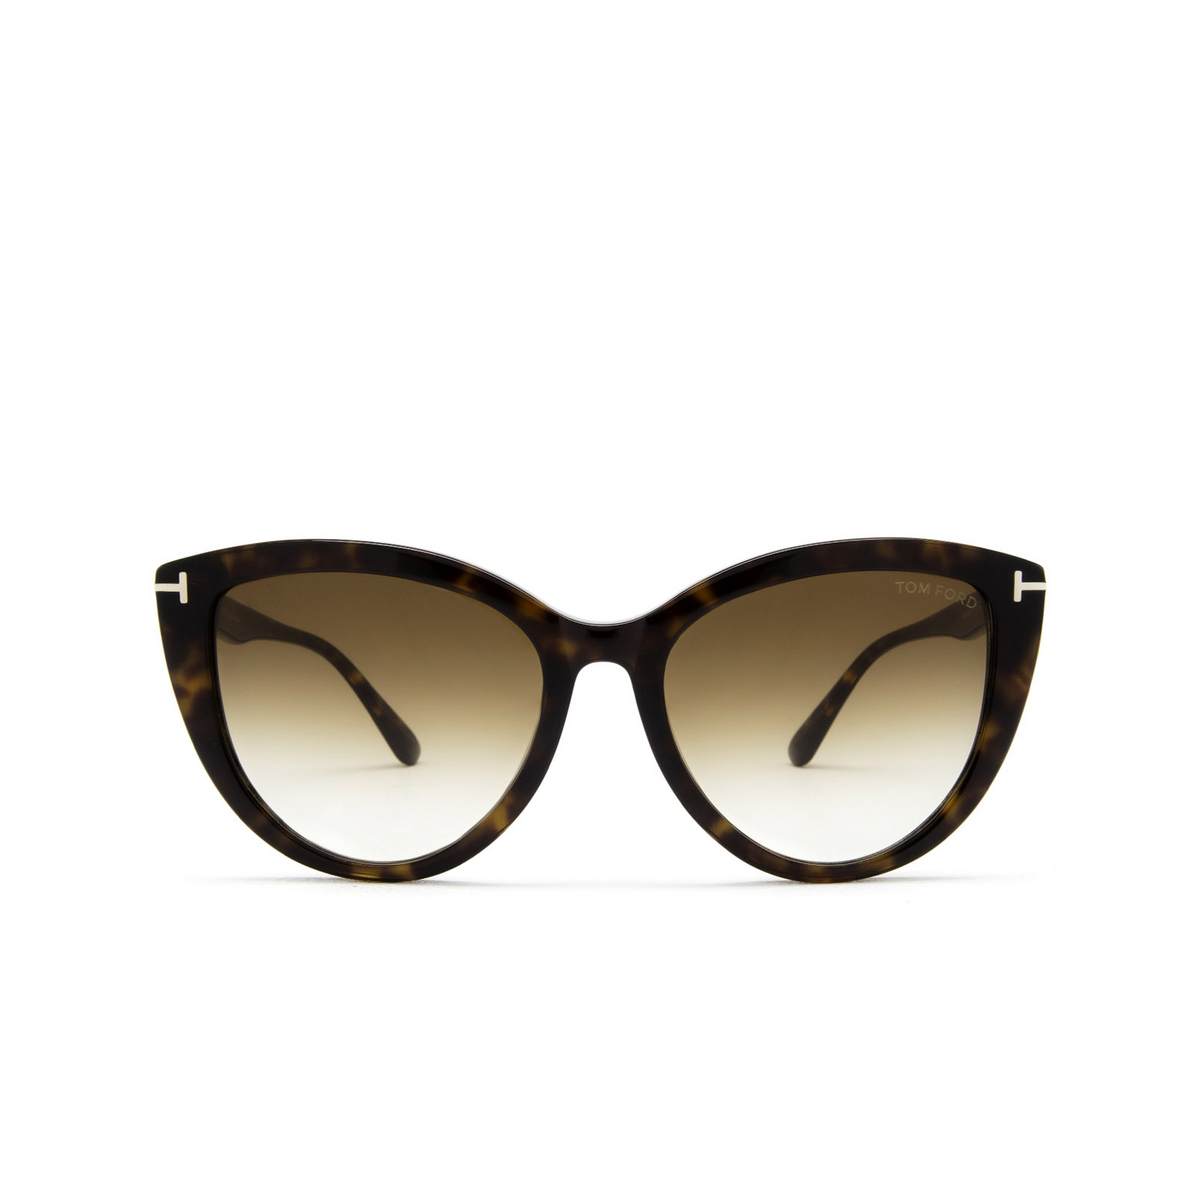 Tom Ford ISABELLA-02 Sunglasses 52F Havana - front view